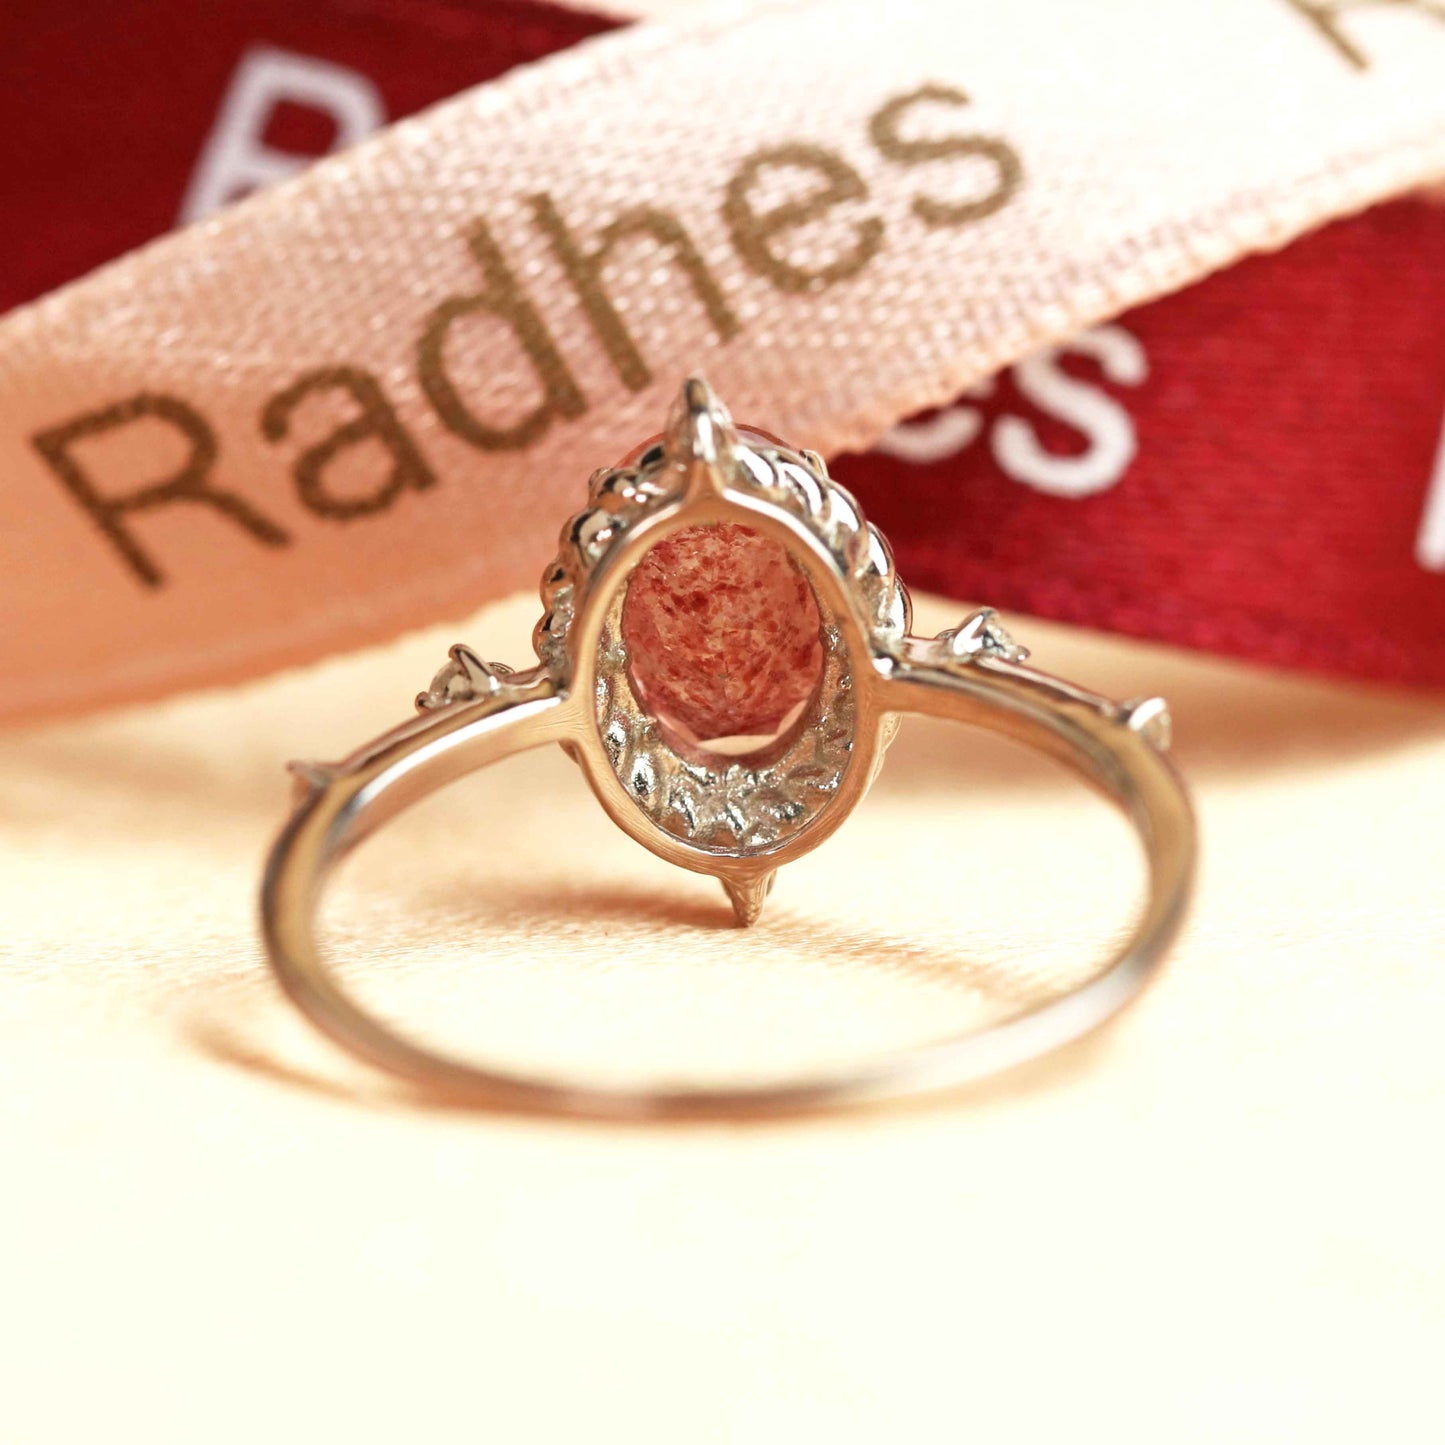 Swirl 1.05 carat Oval Cut Red Strawberry Quartz and Diamond Accent Vintage Ring in White Gold